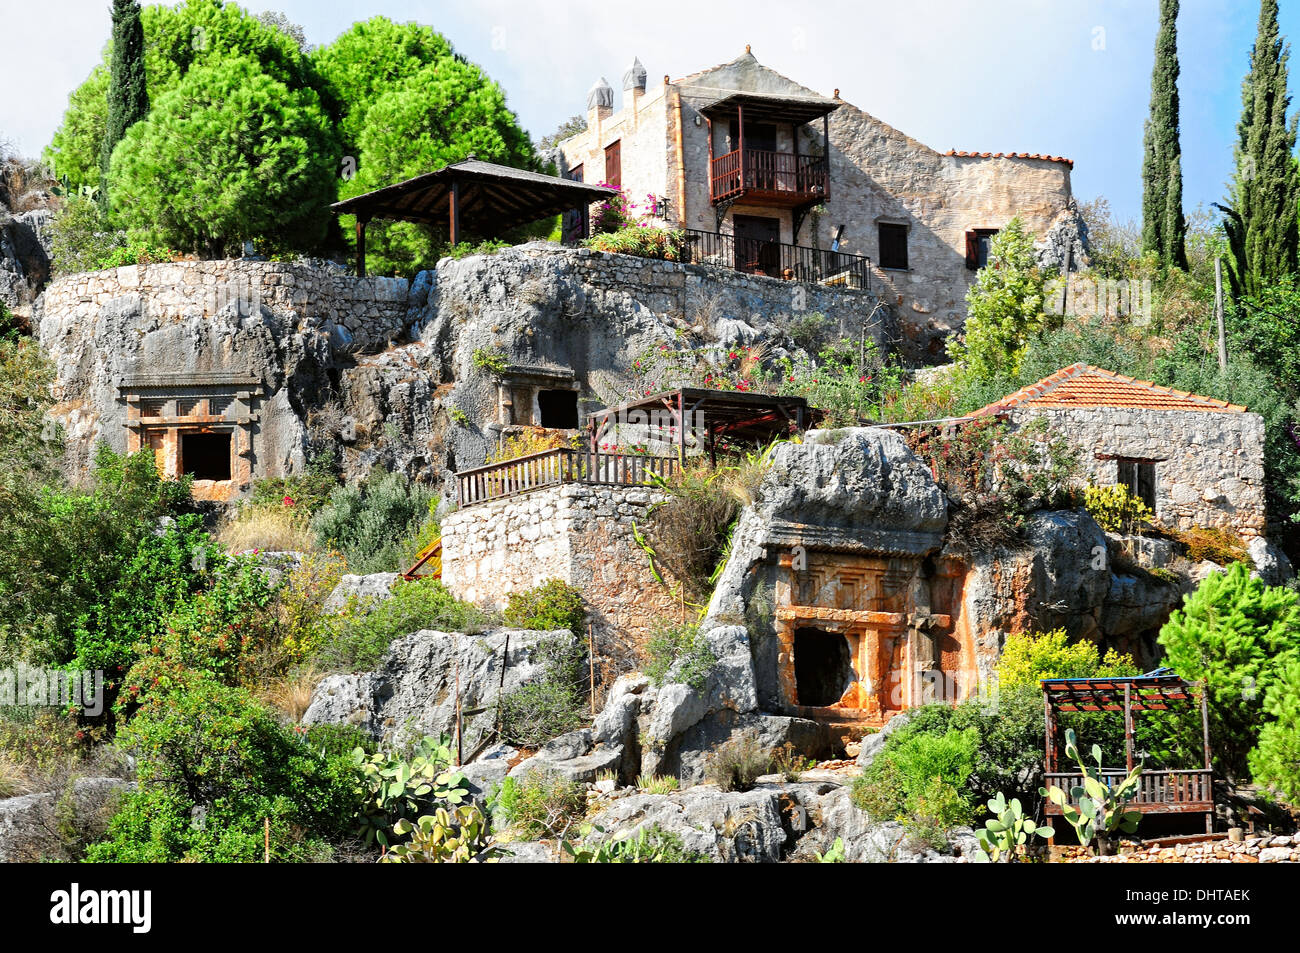 The rock tombs in Turkey Kale Stock Photo